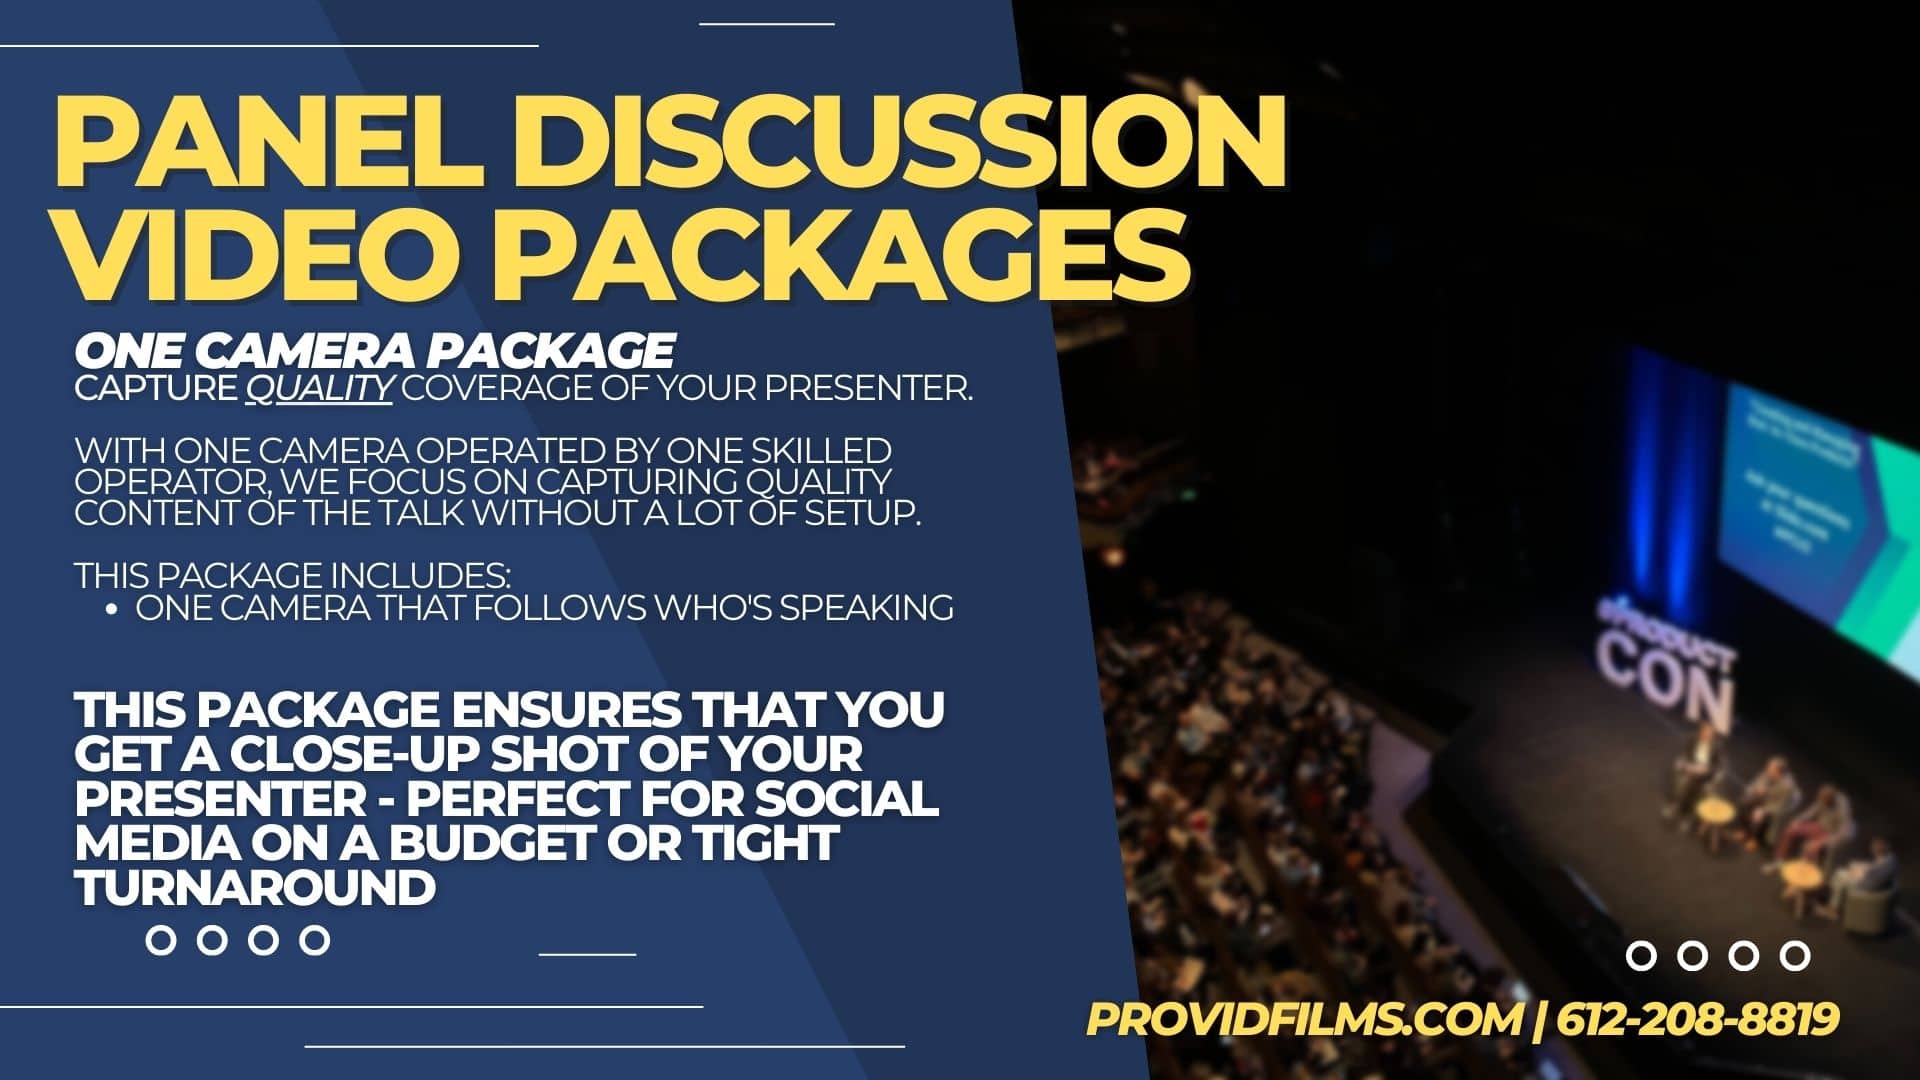 Panel Discussions Video Services Graphic - 1 camera package